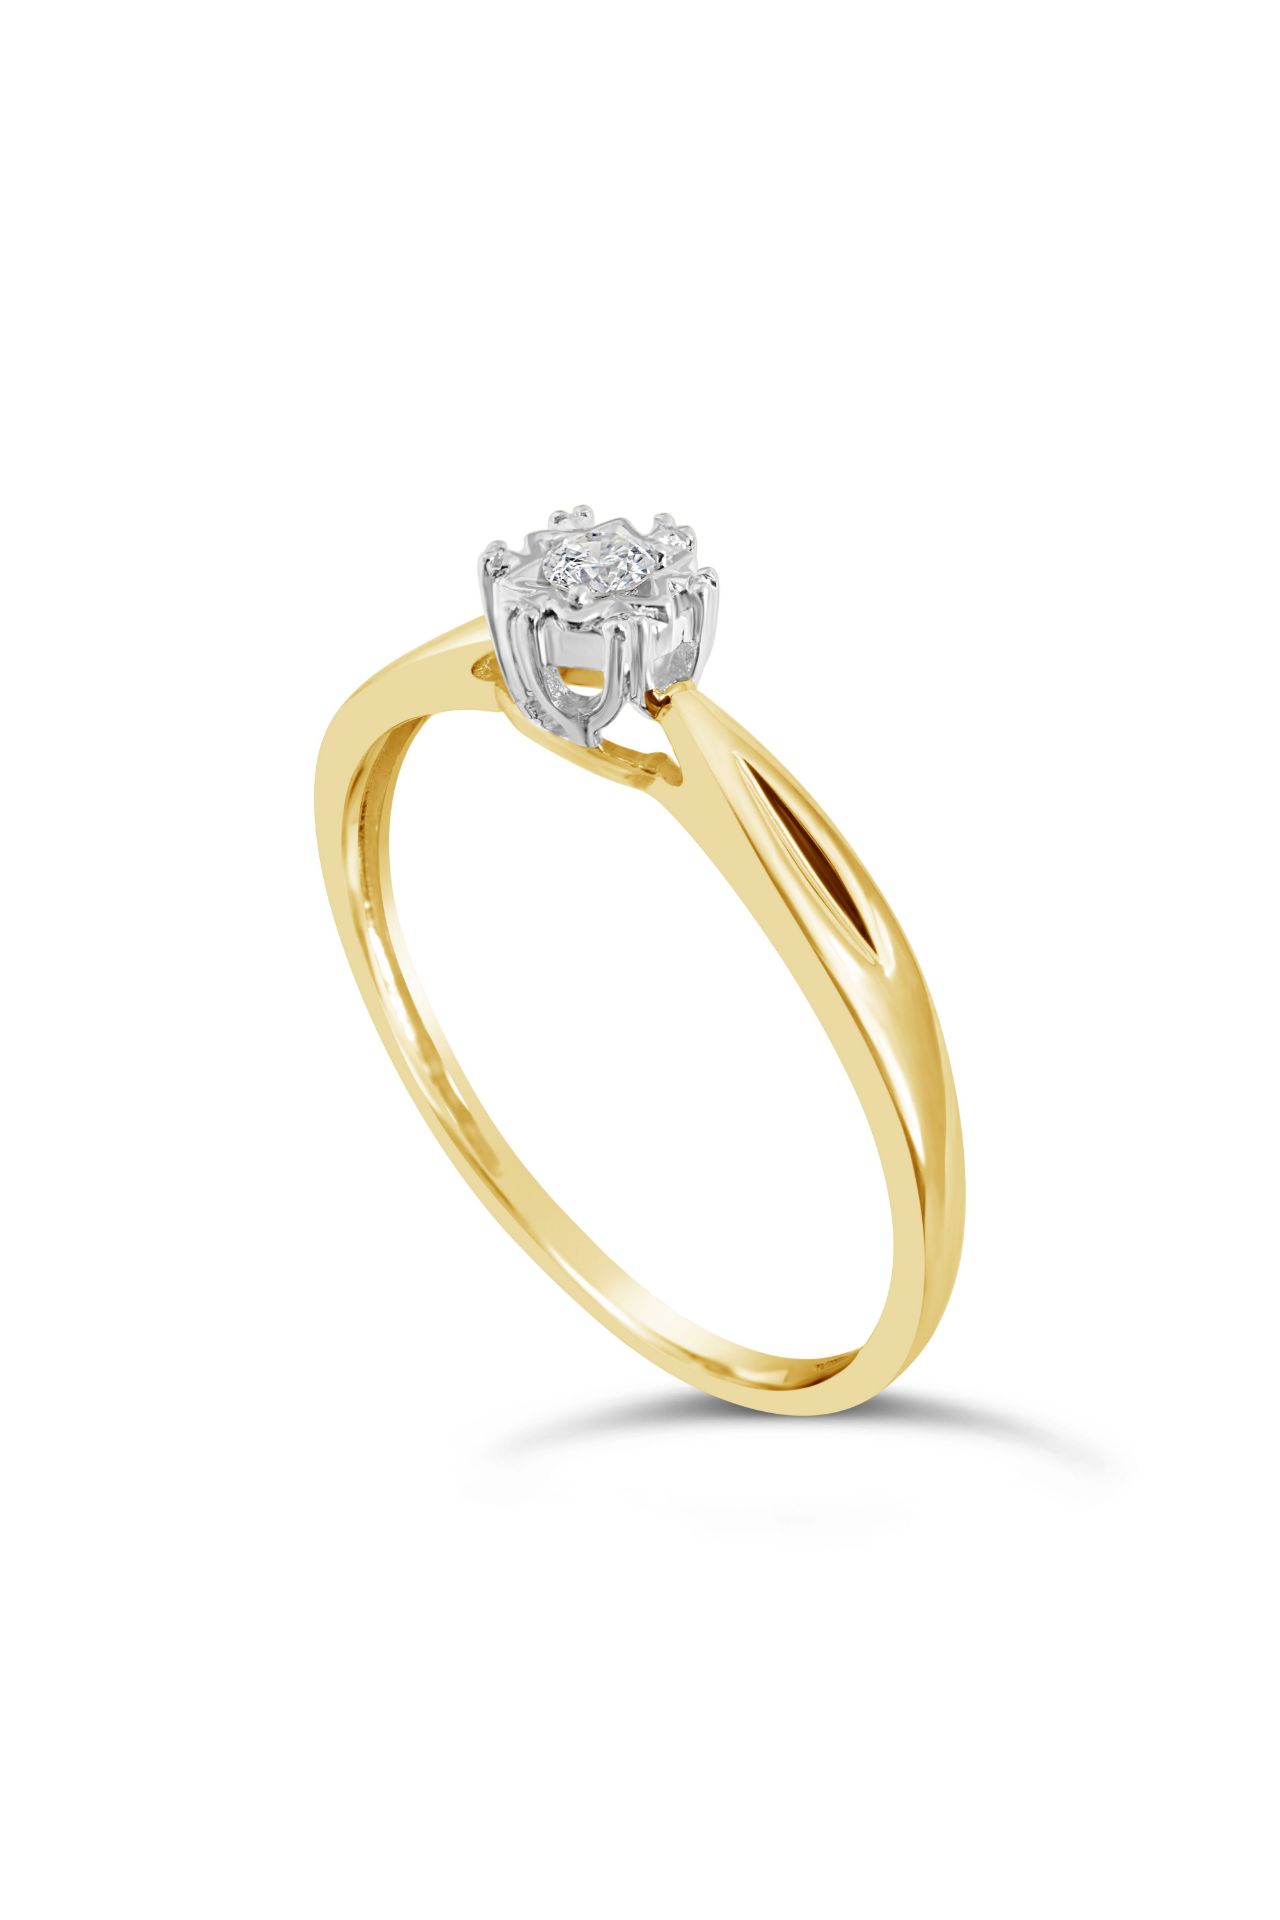 Yellow Gold Diamond Solitaire Ring, Metal 9ct Yell - Image 2 of 4